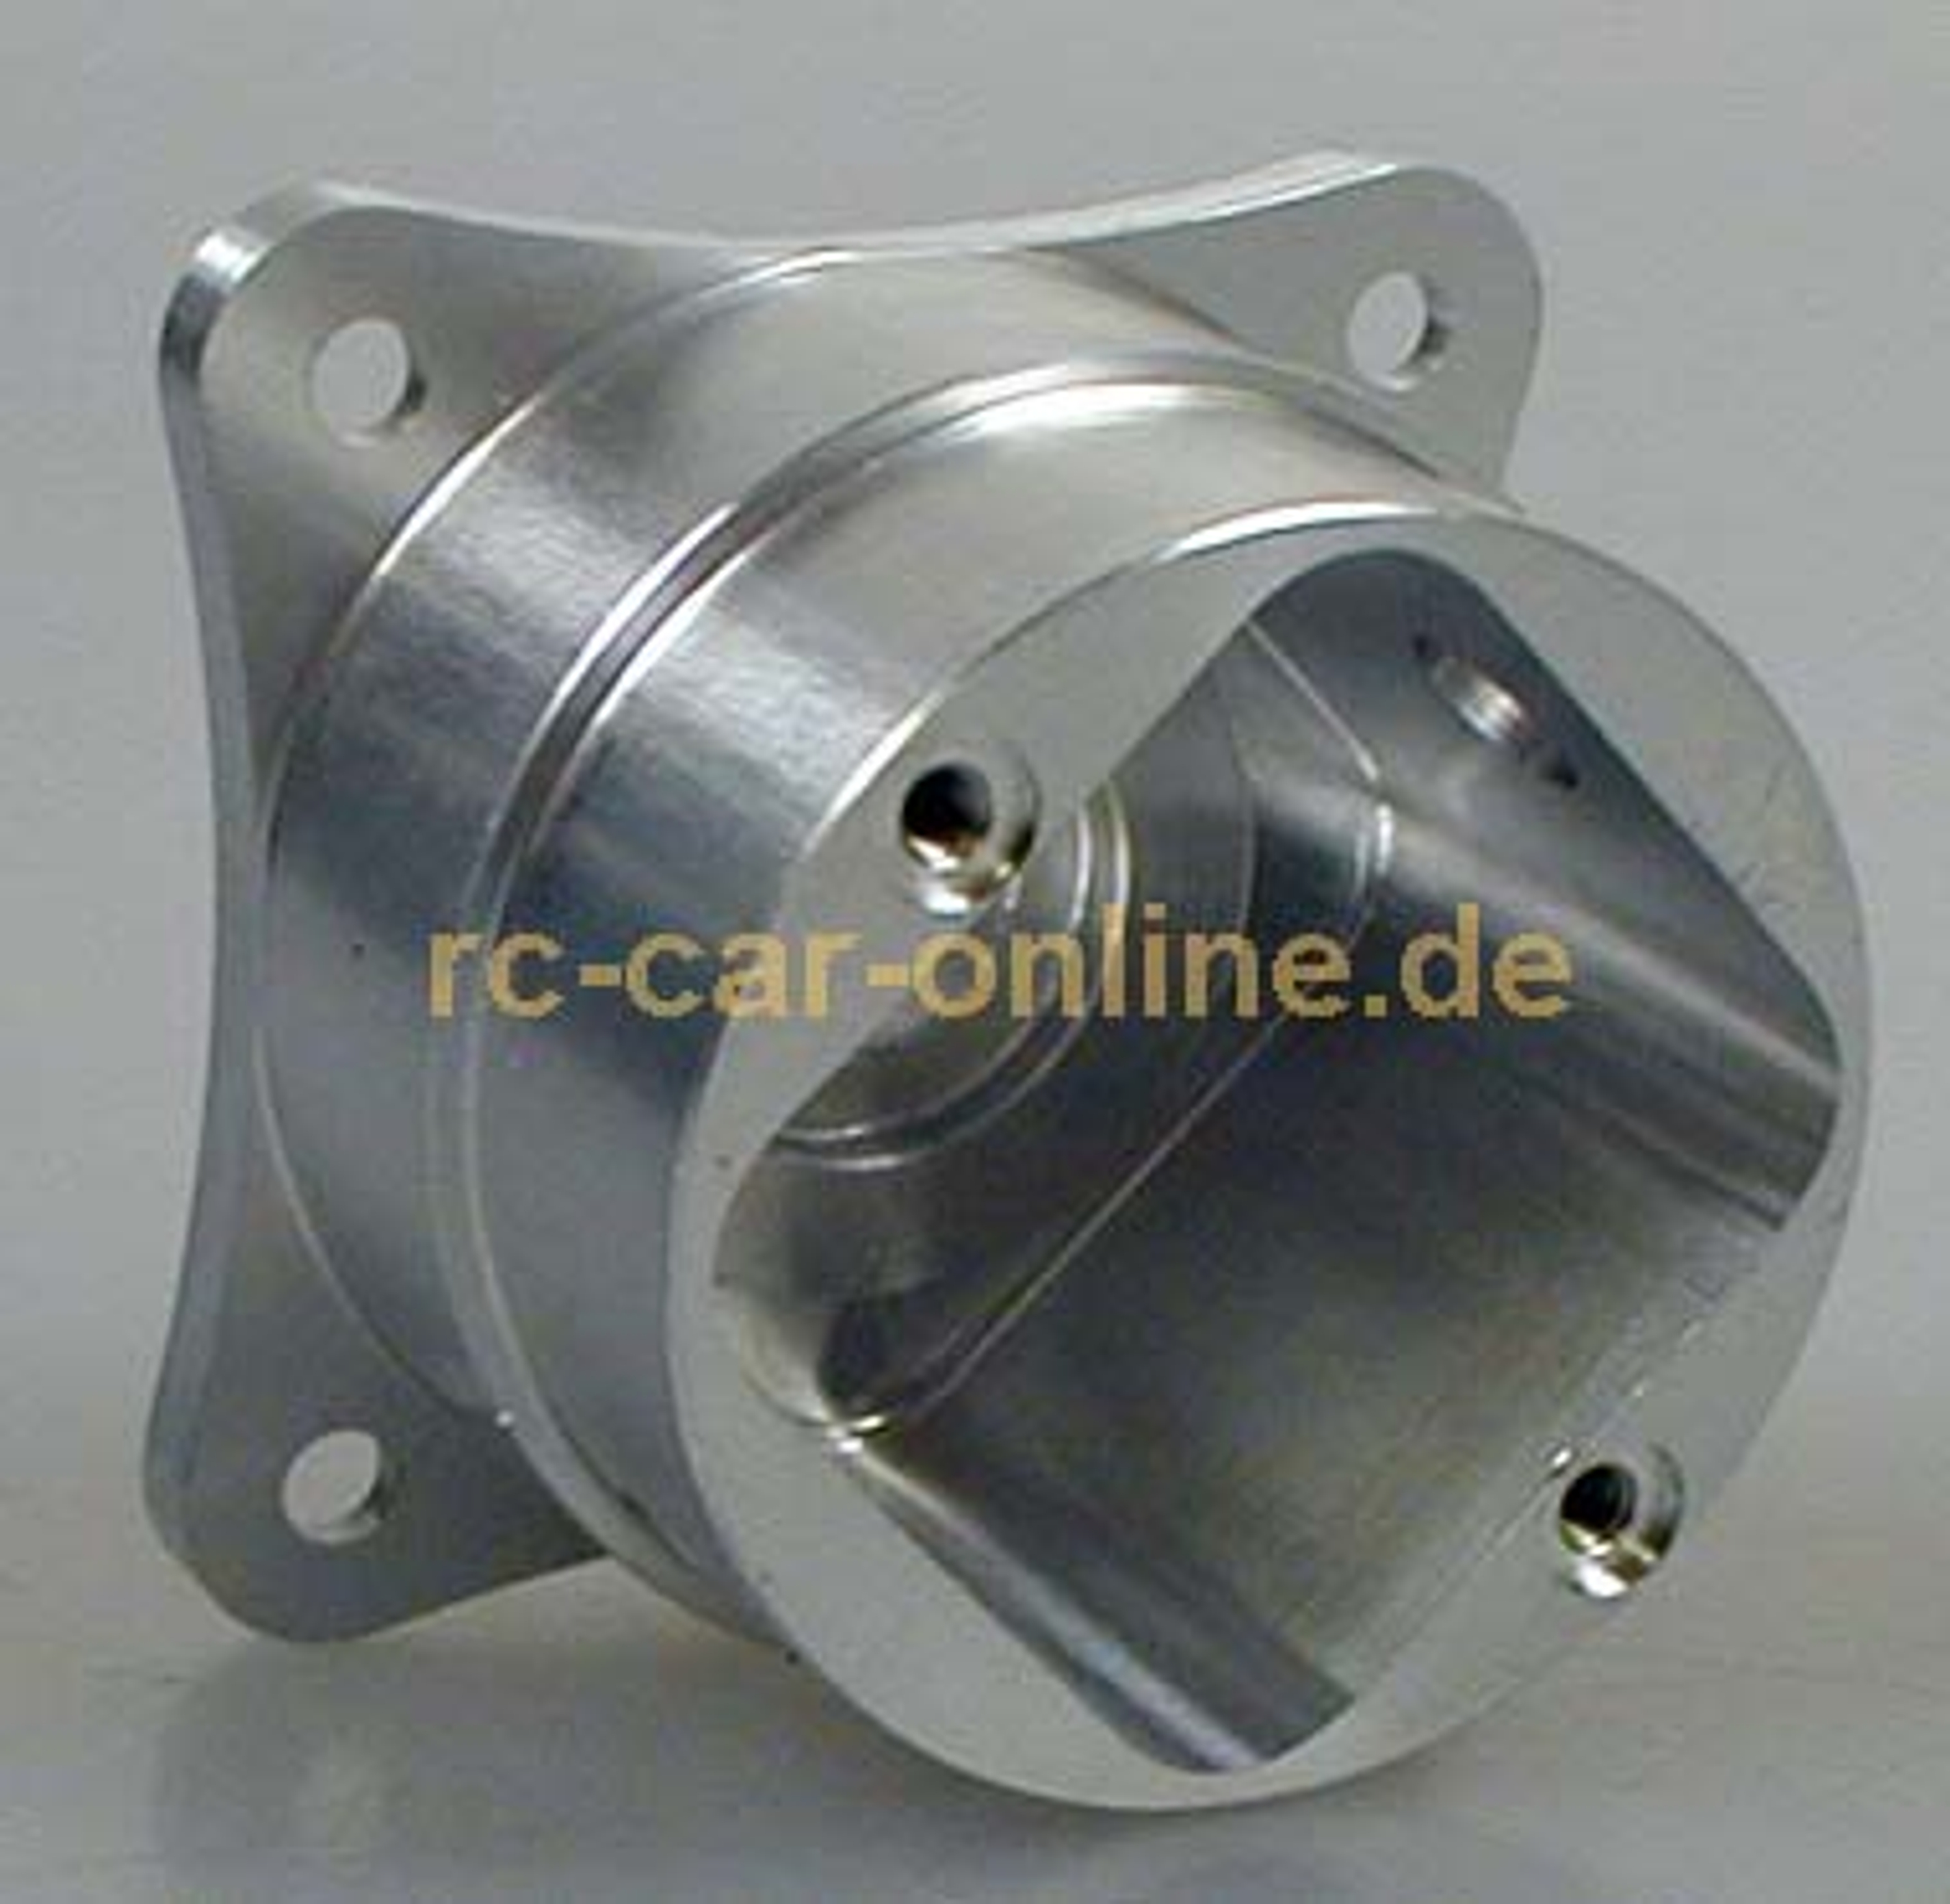 8600/01 FG Alloy case A for visc. differential - 1pce.